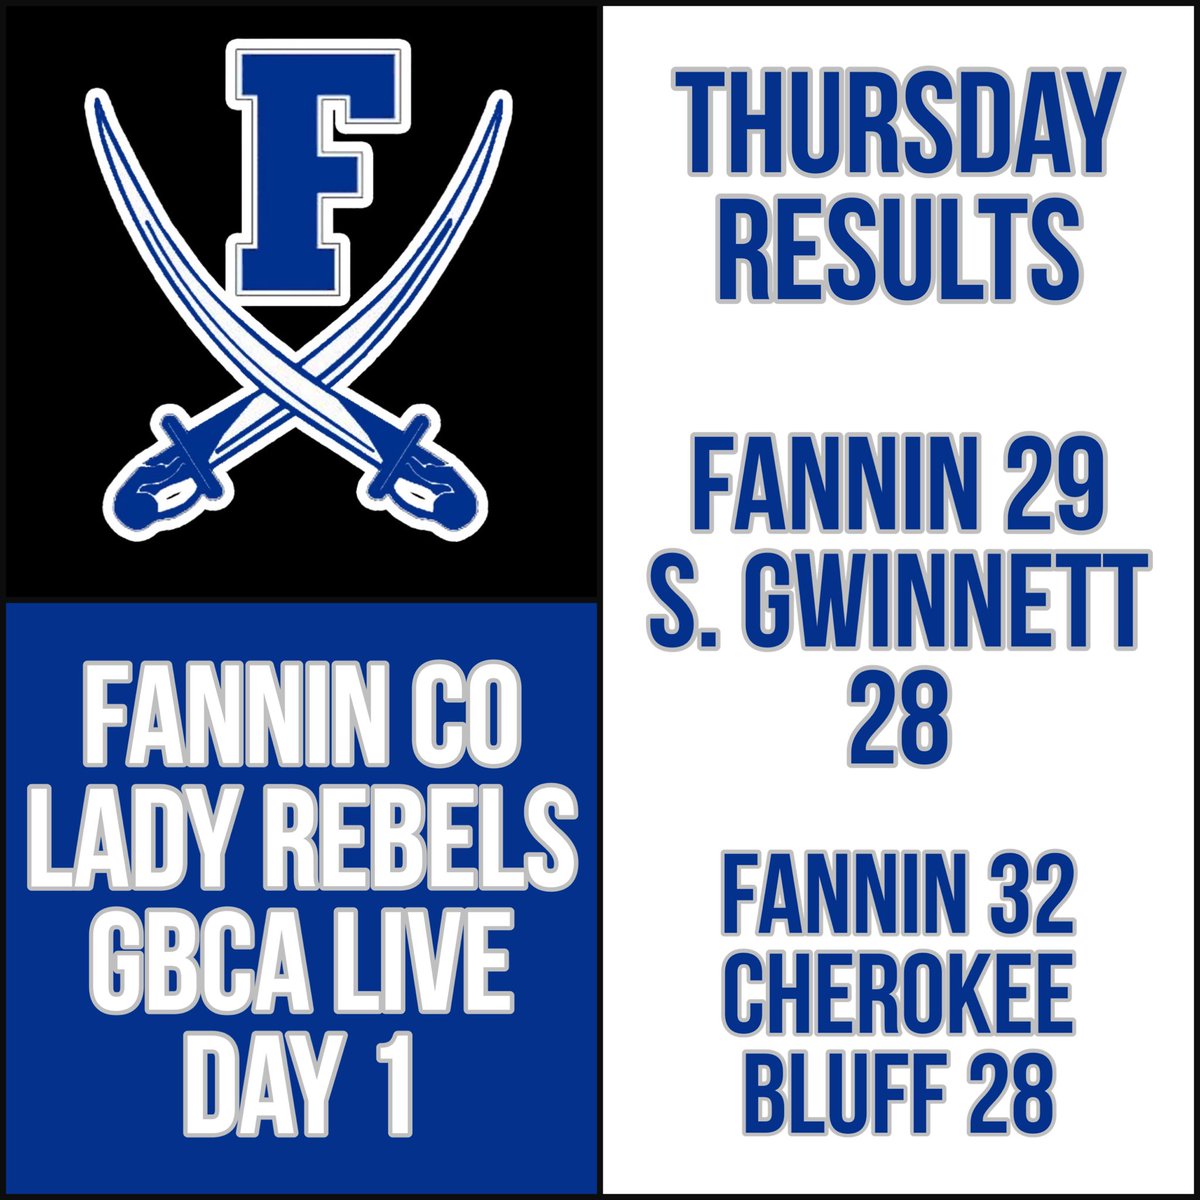 Great start to the live event with two come from behind wins today! Proud of our girls who really battled to go 2-0. Thank you to all the college coaches who came to watch us play. #gbcagirlslive #ladyrebelsbasketball